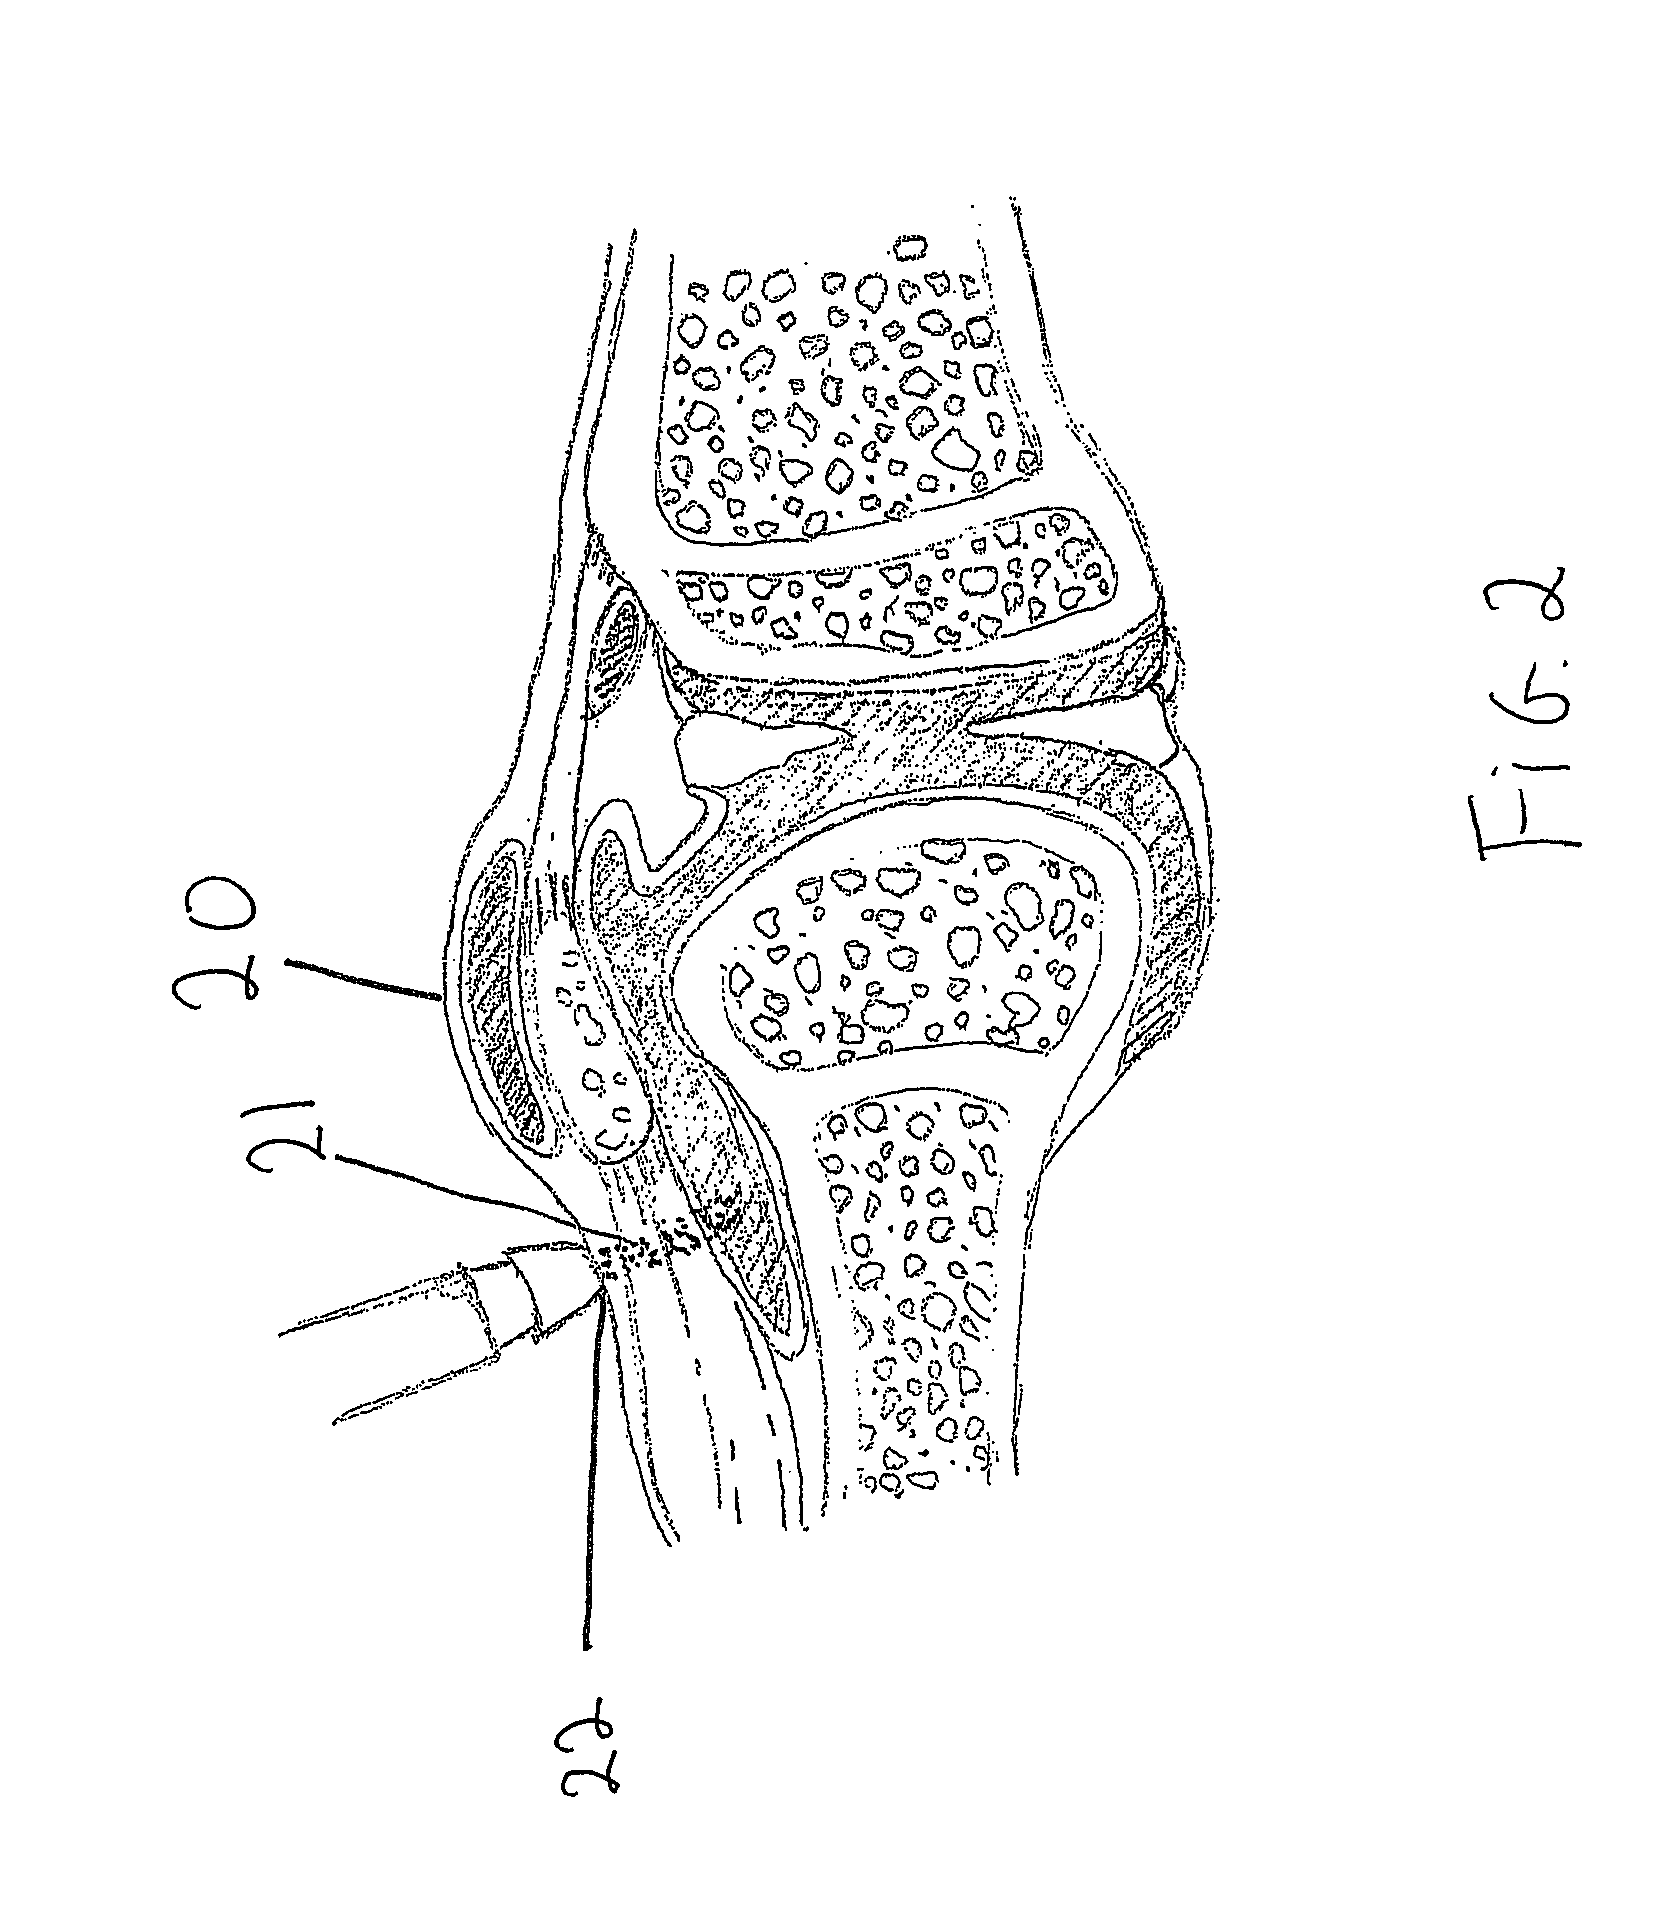 Device and method for treating musculo-skeletal injury and pain by application of laser light therapy